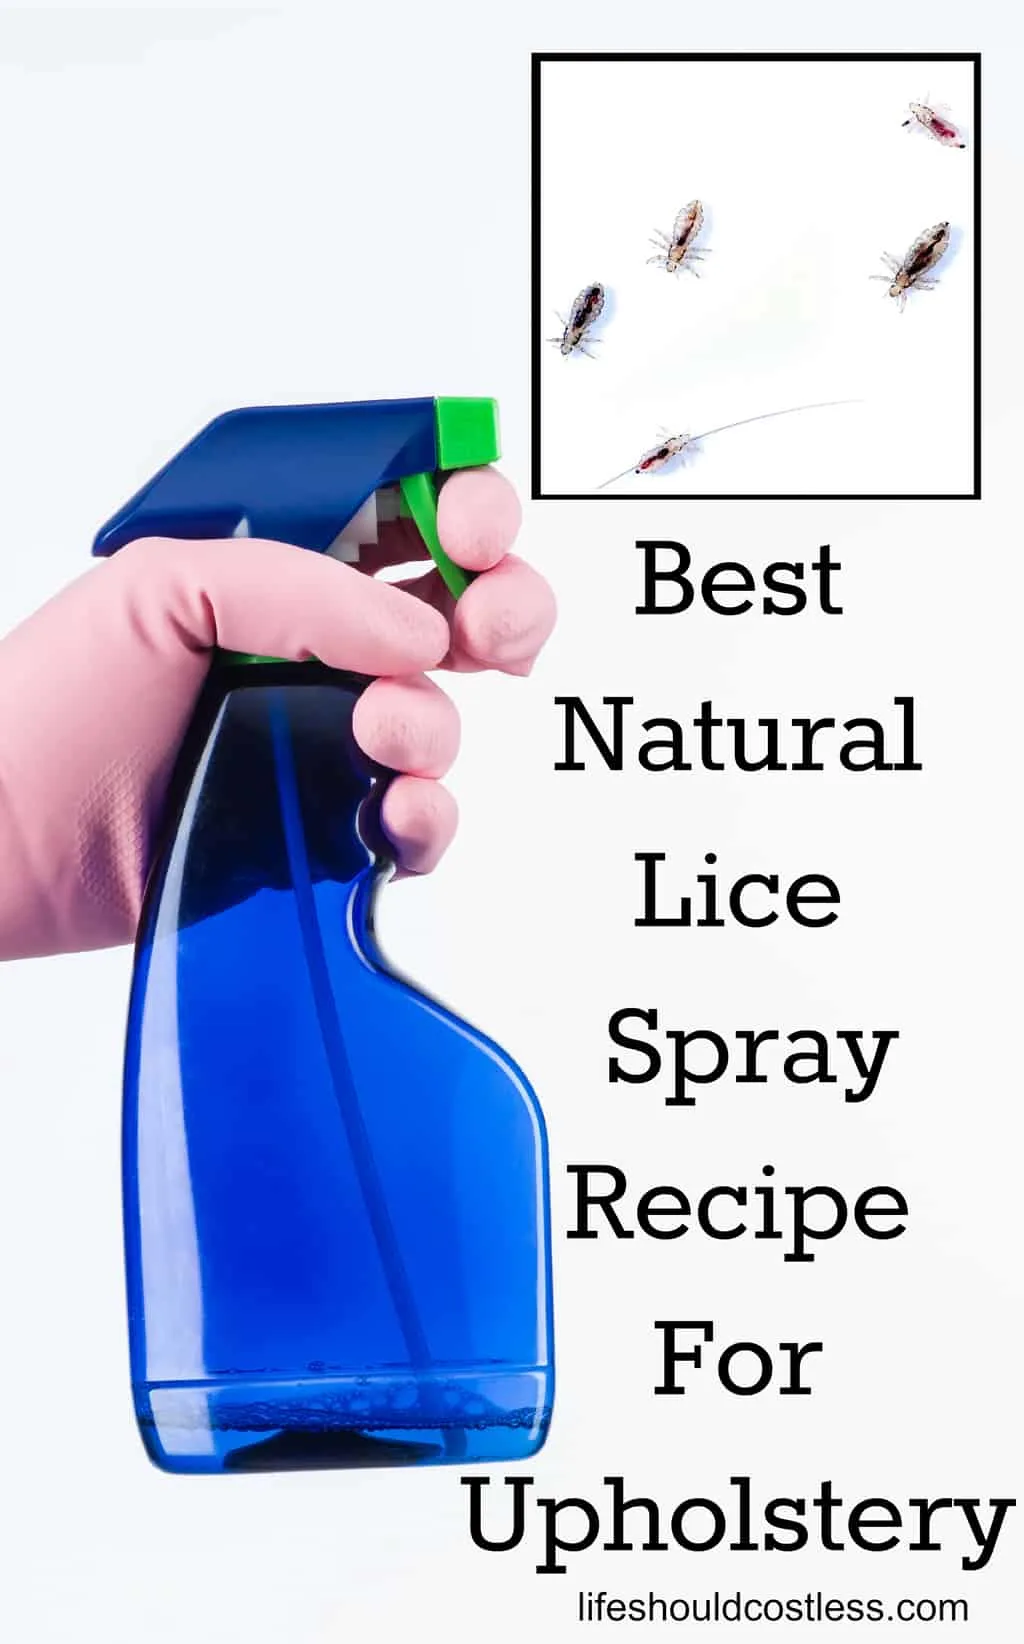 Best Head Lice Treatment Spray Recipe For Upholstery (couches, beds,  carpet, plush toys, furniture, car interior) - Life Should Cost Less